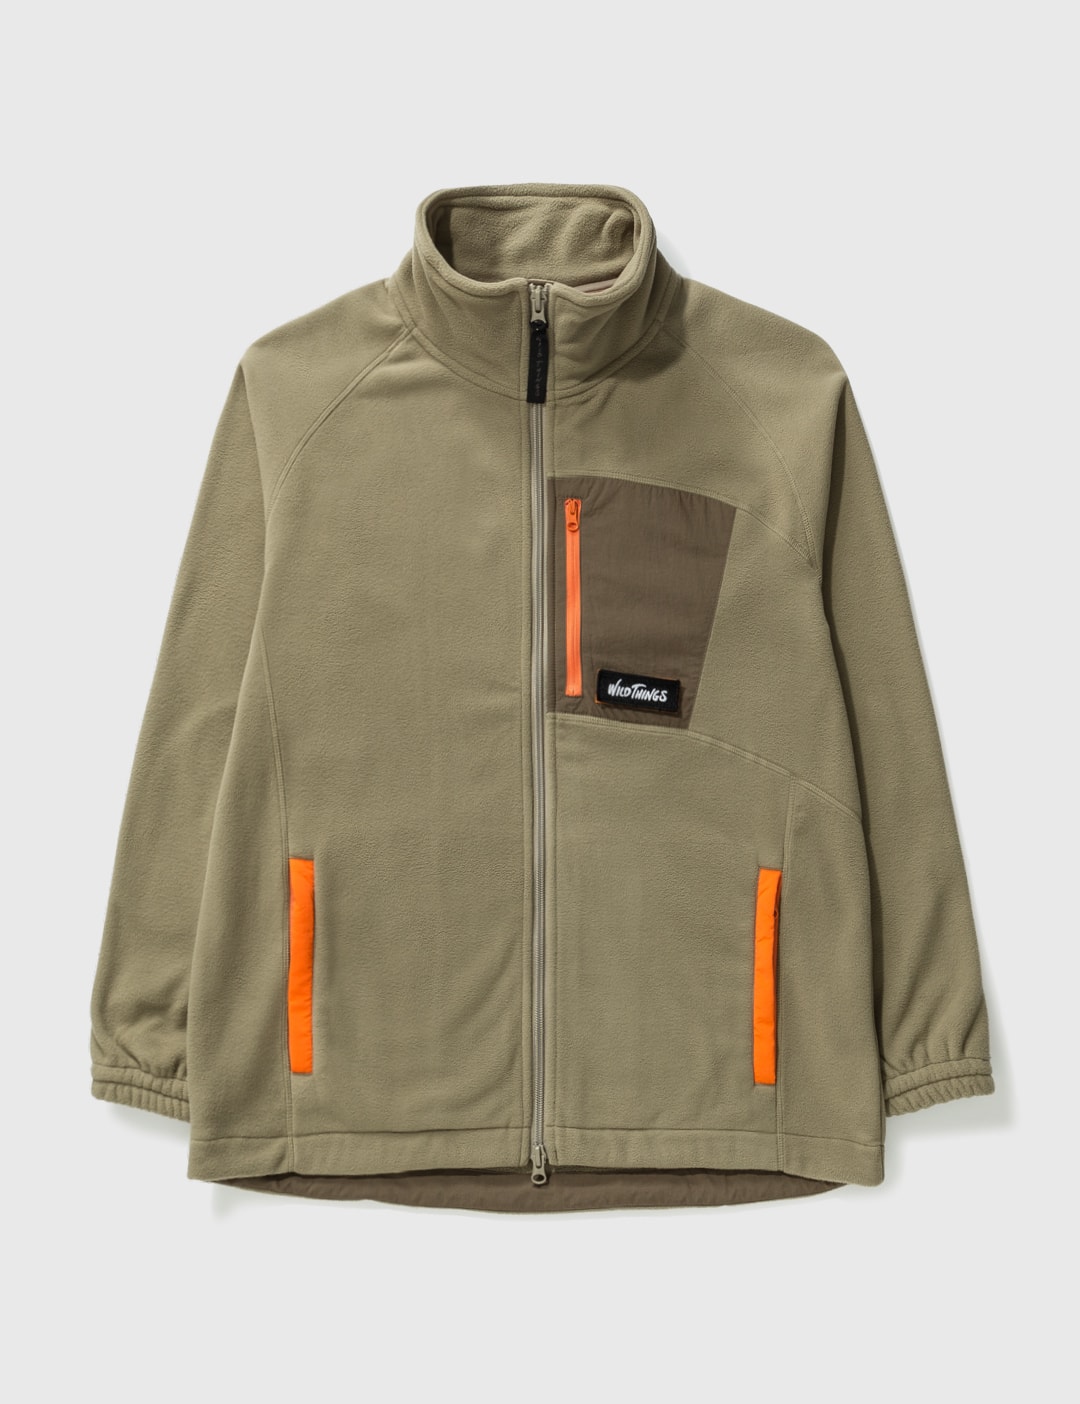 Lagere school koffie Verbetering WILD THINGS - Wild Things x Merrell Polartec Jacket | HBX - Globally  Curated Fashion and Lifestyle by Hypebeast